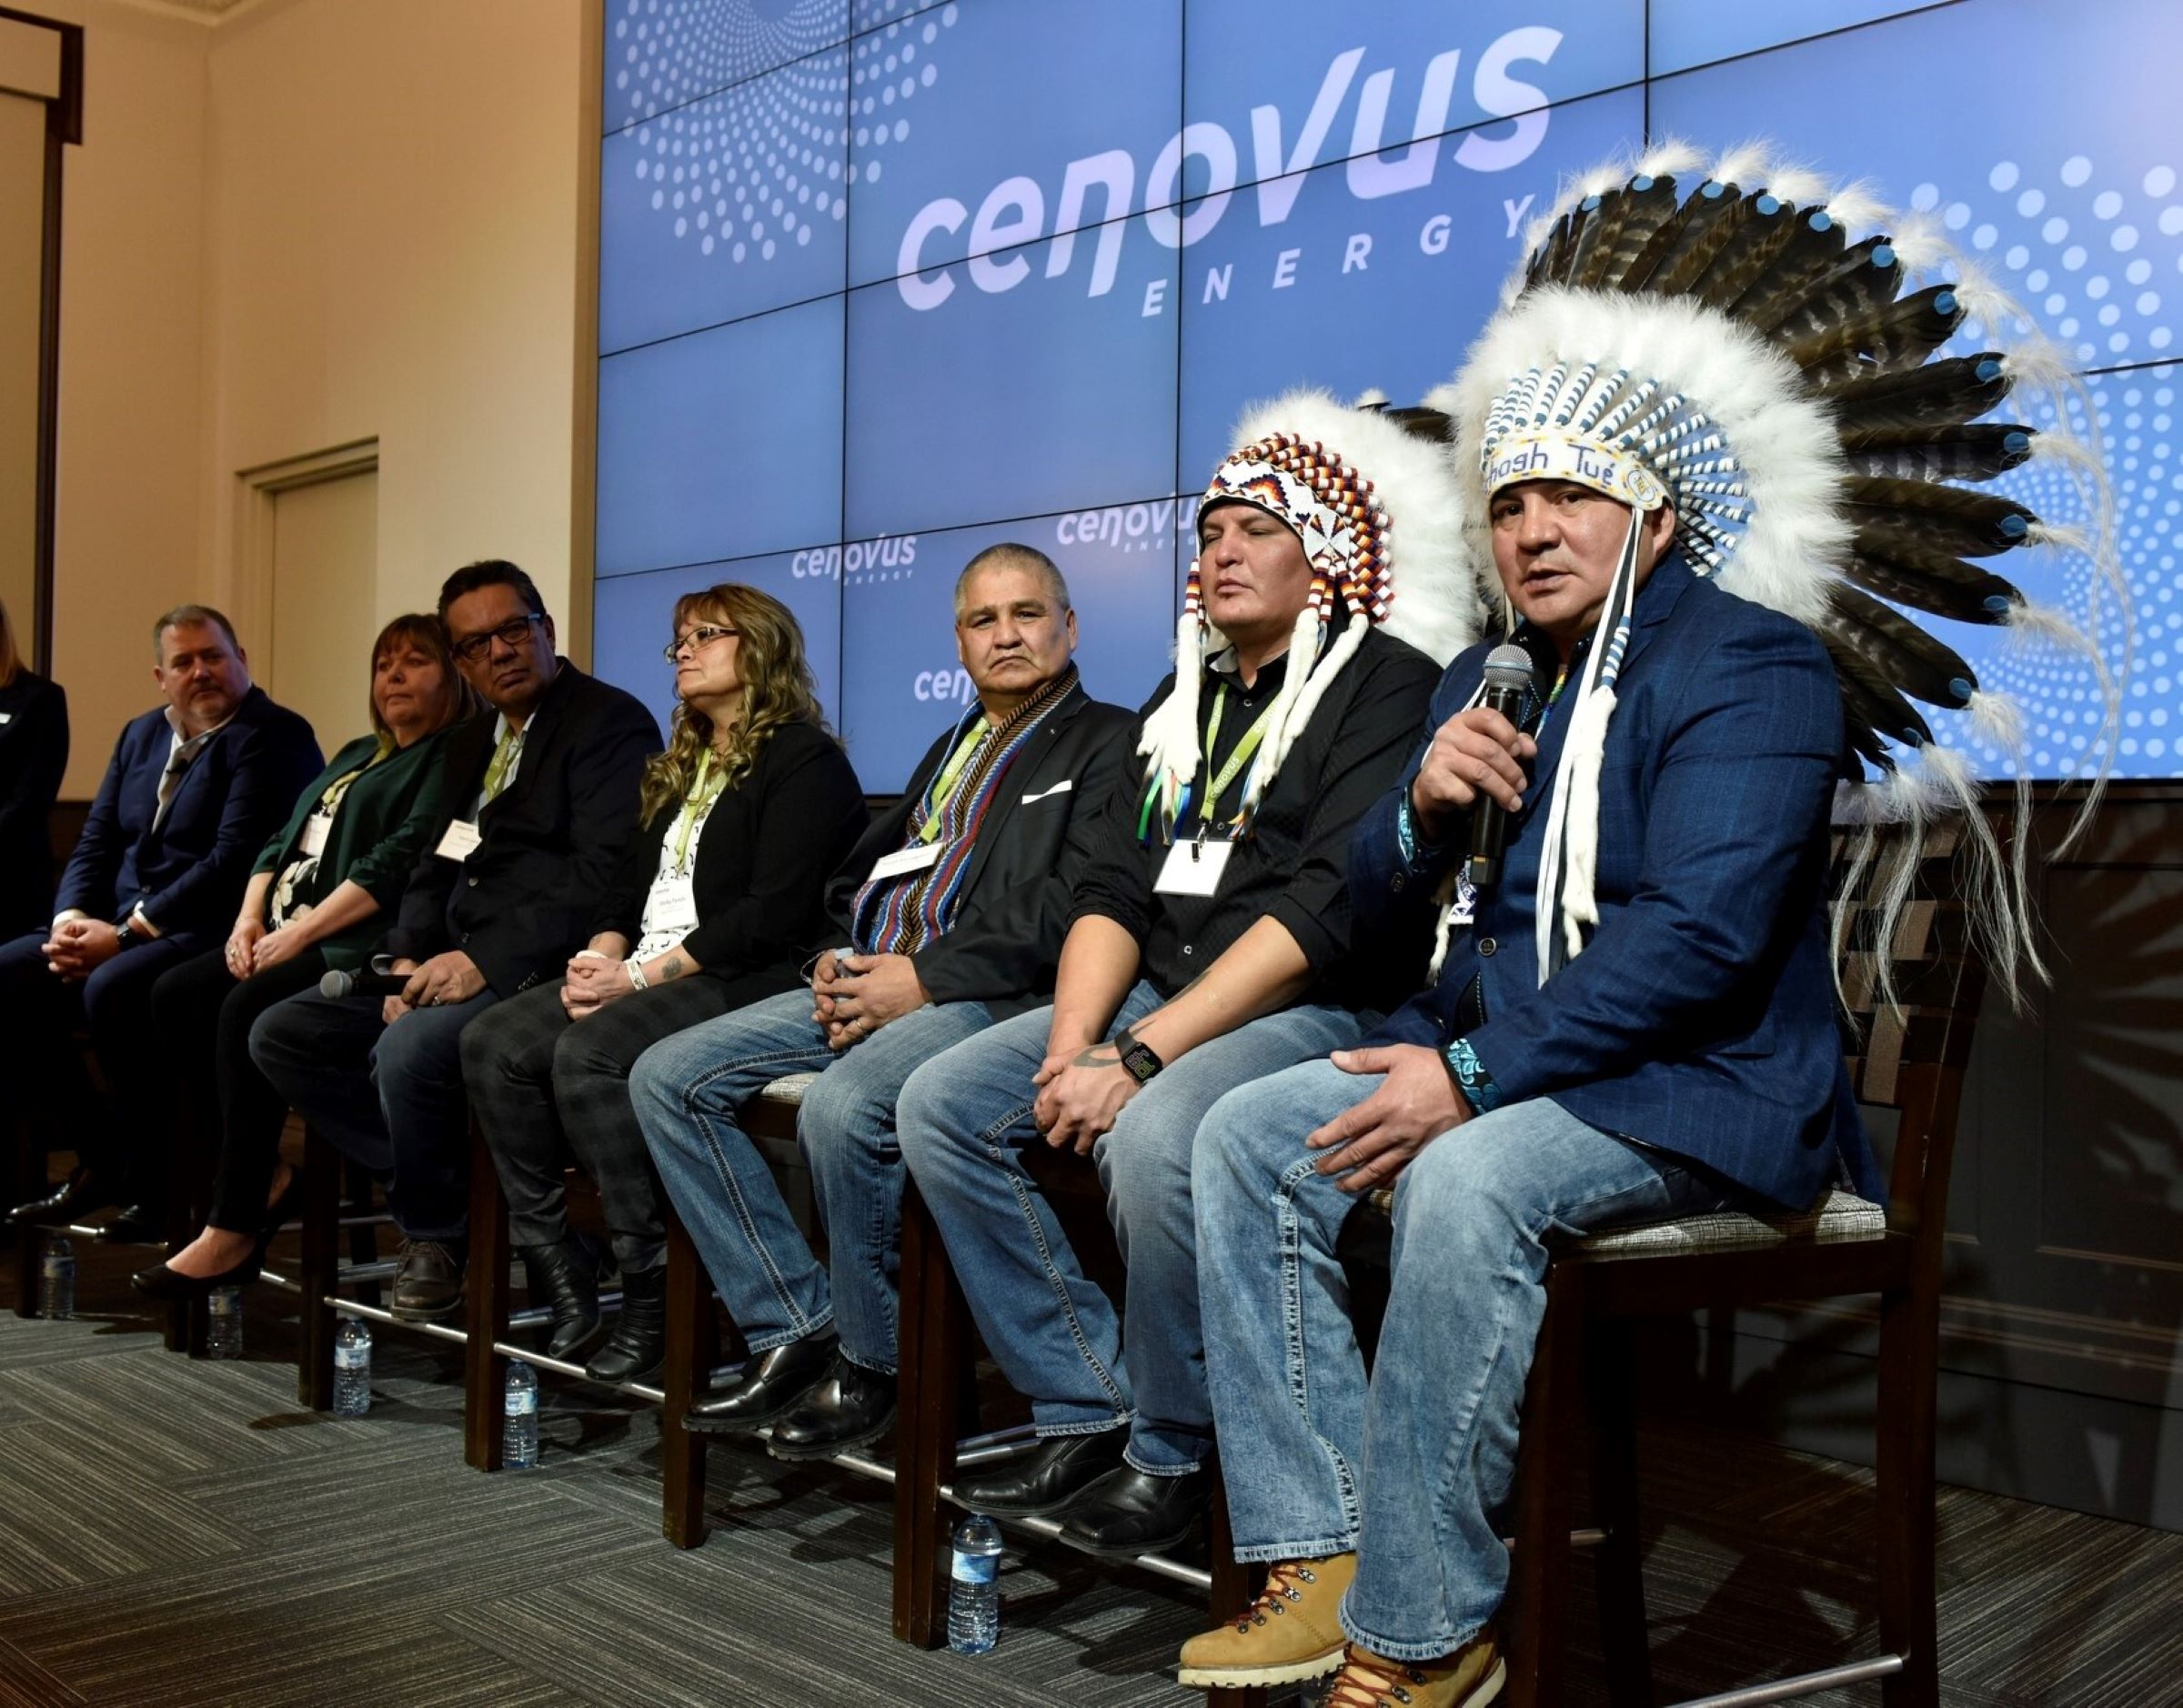 Indigenous leaders discussing UNDRIP